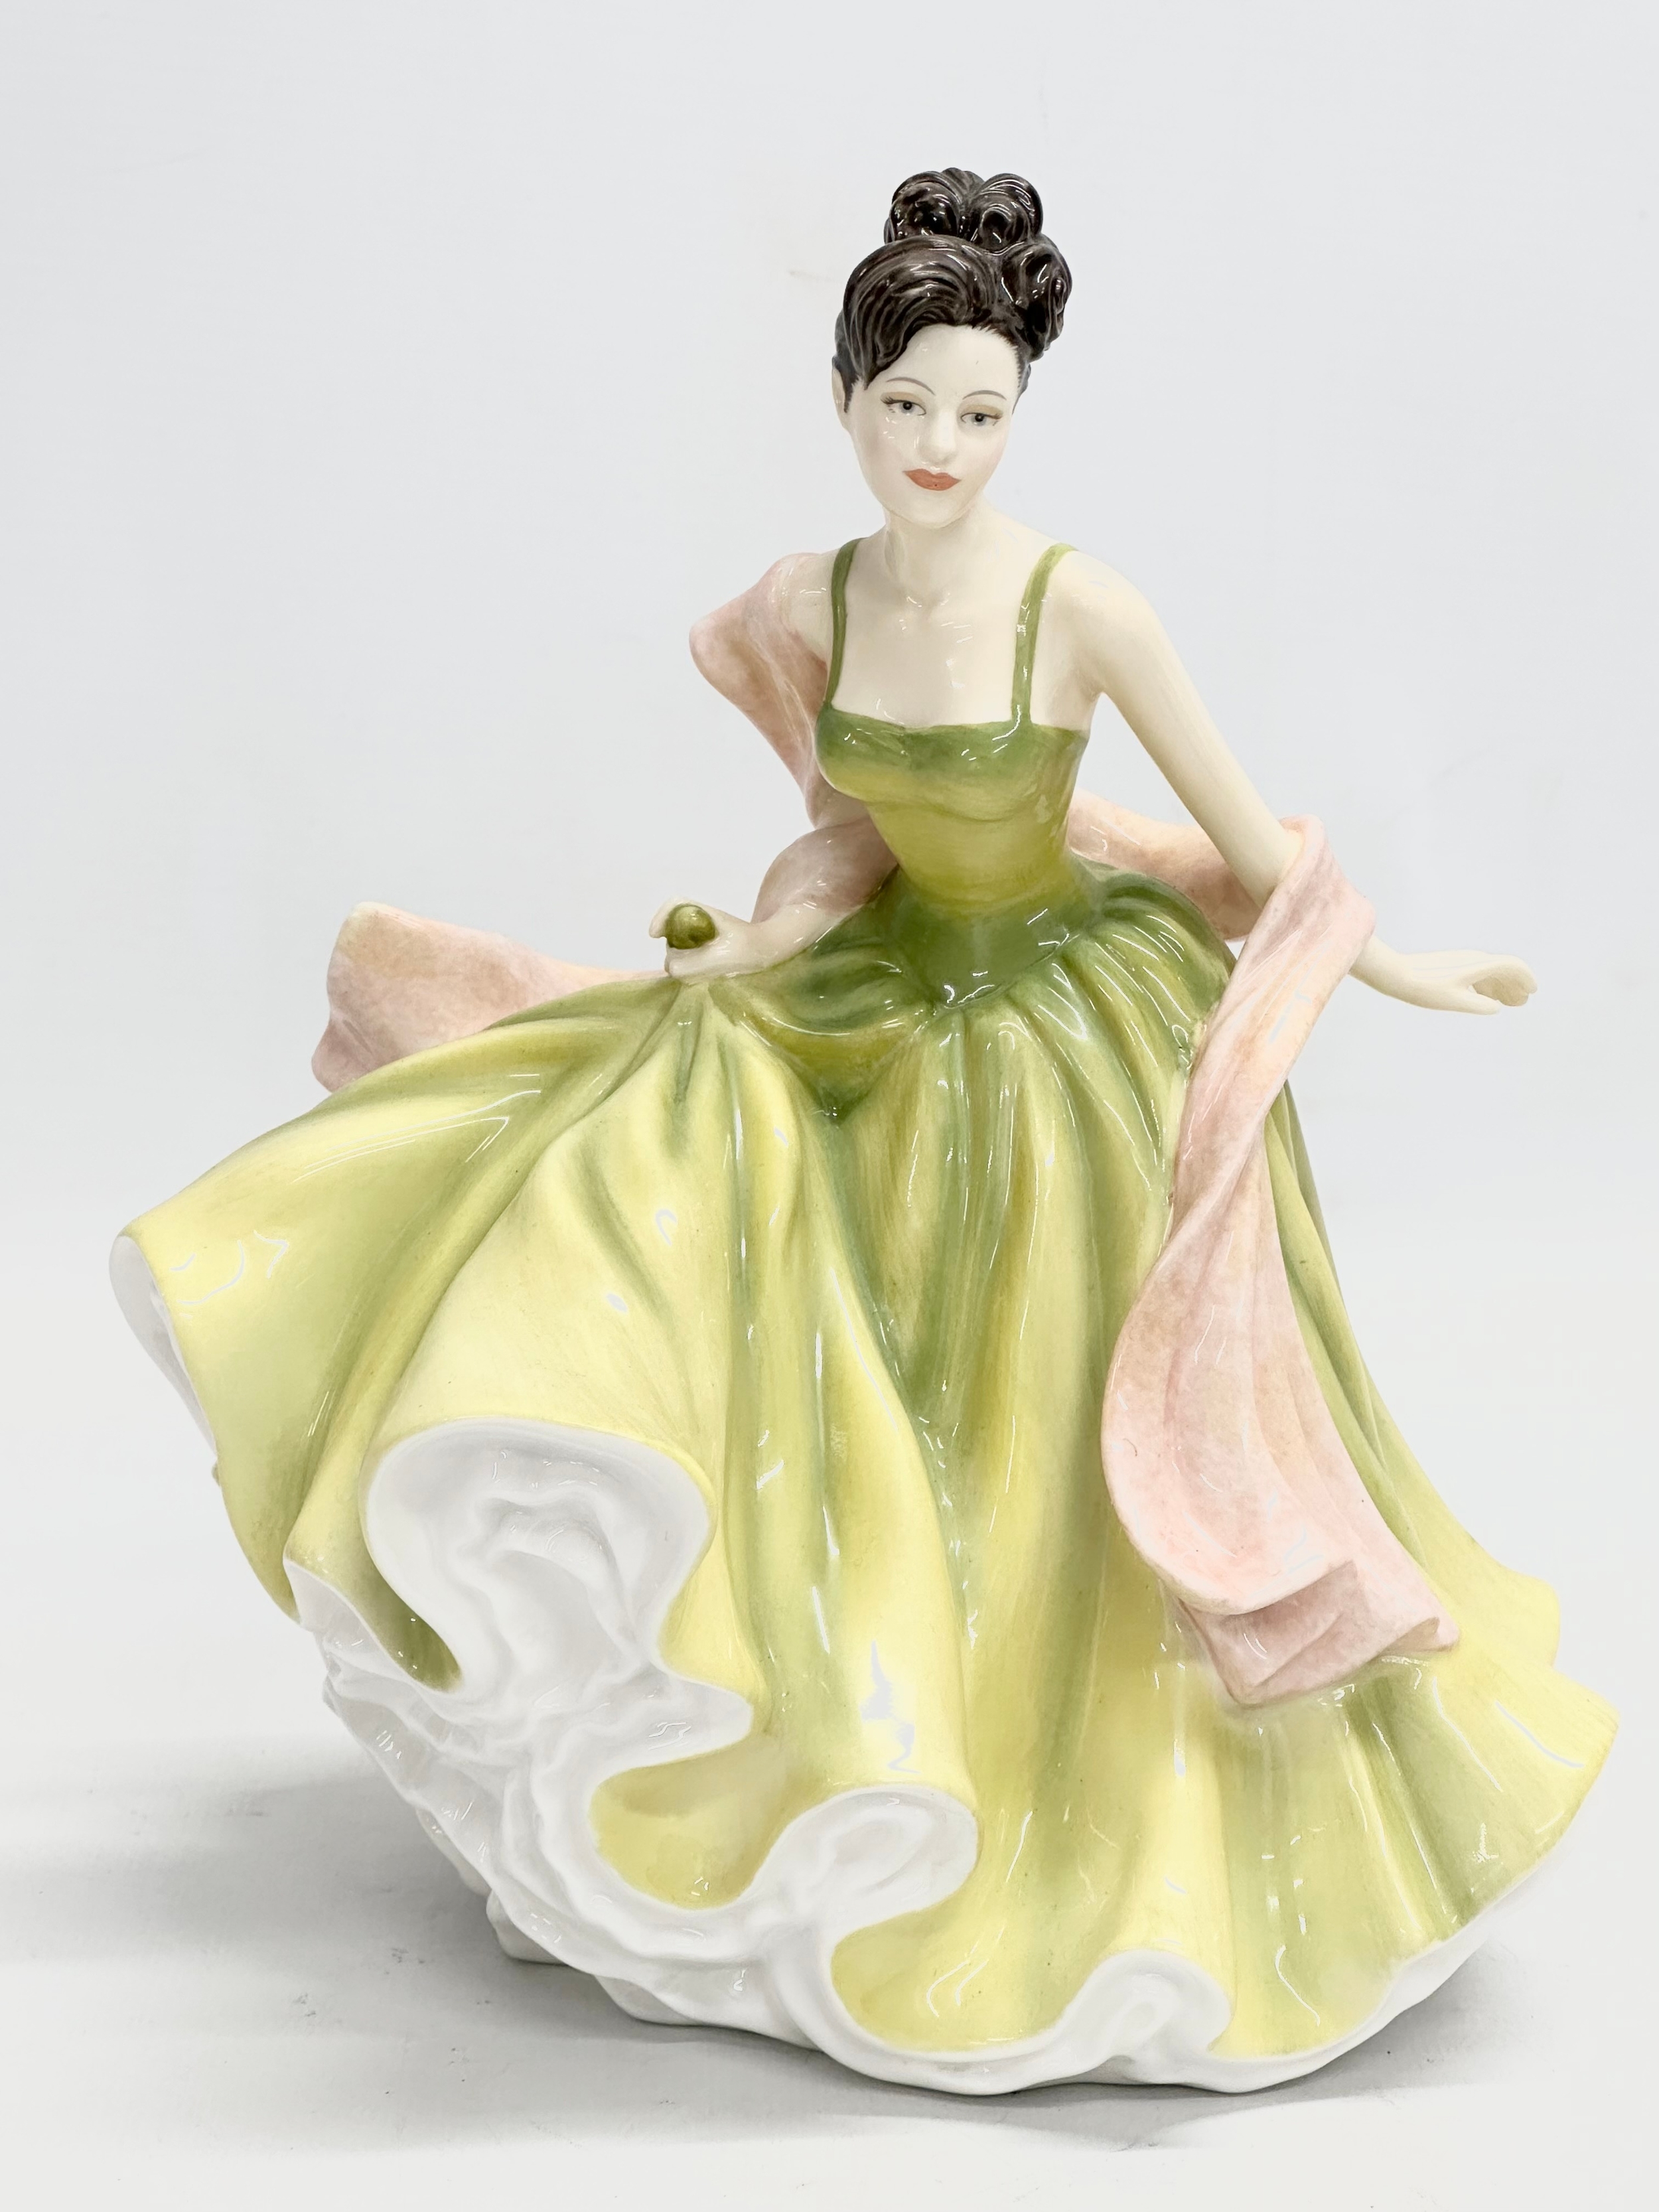 4 Royal Doulton figurines. Her Ladyship RN 842480. Top O’ The Hill, Denise, Pretty Ladies - Image 5 of 9